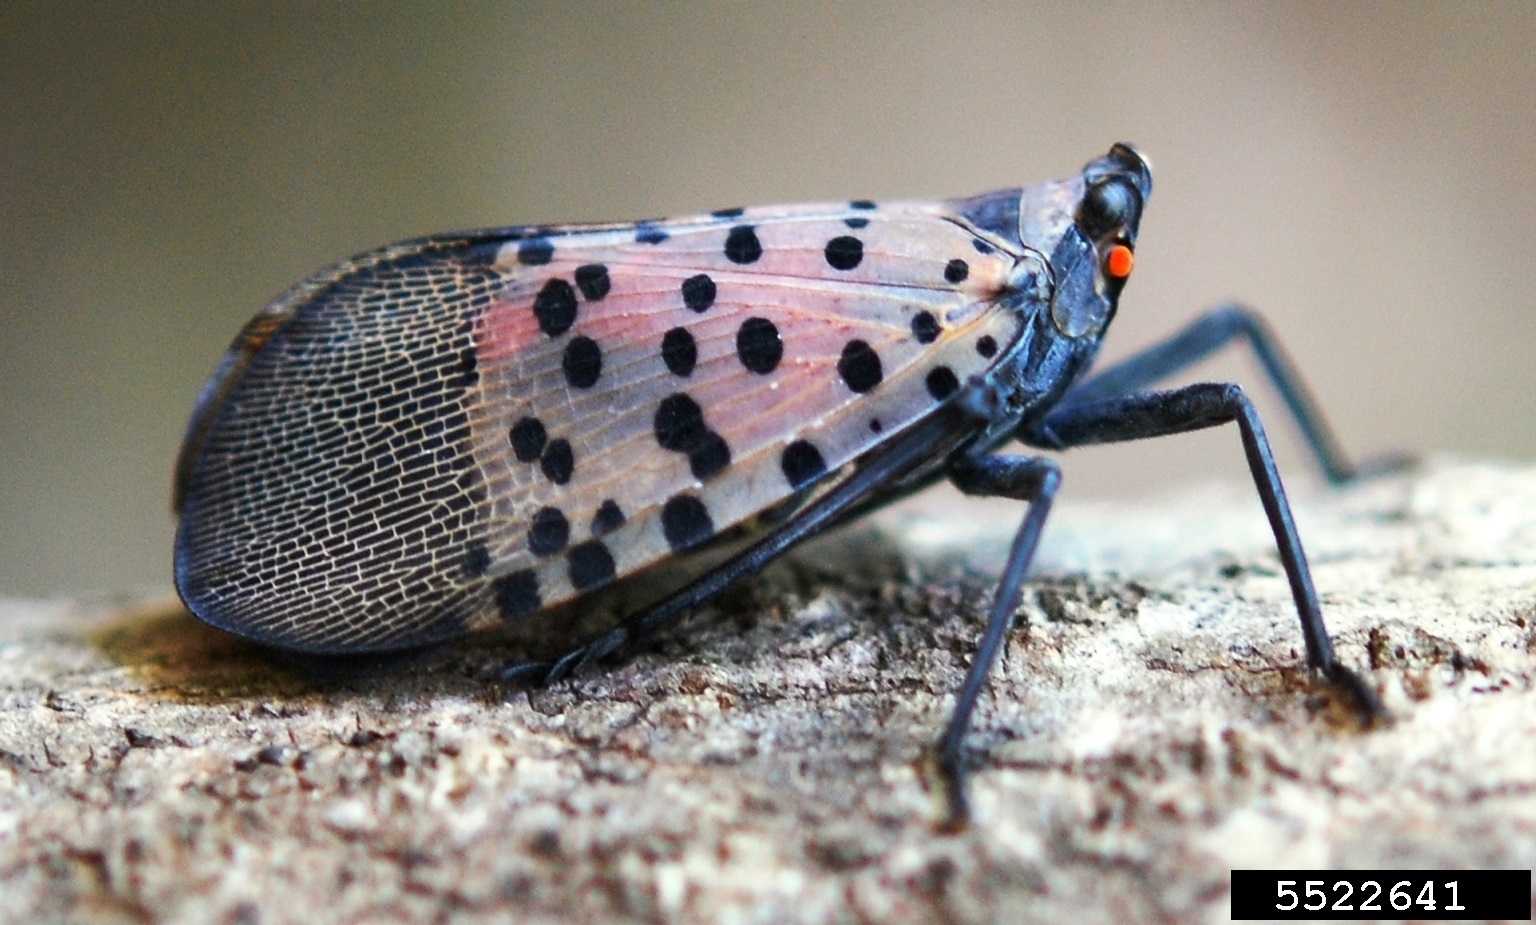 Invasive beetle reported around central Indiana